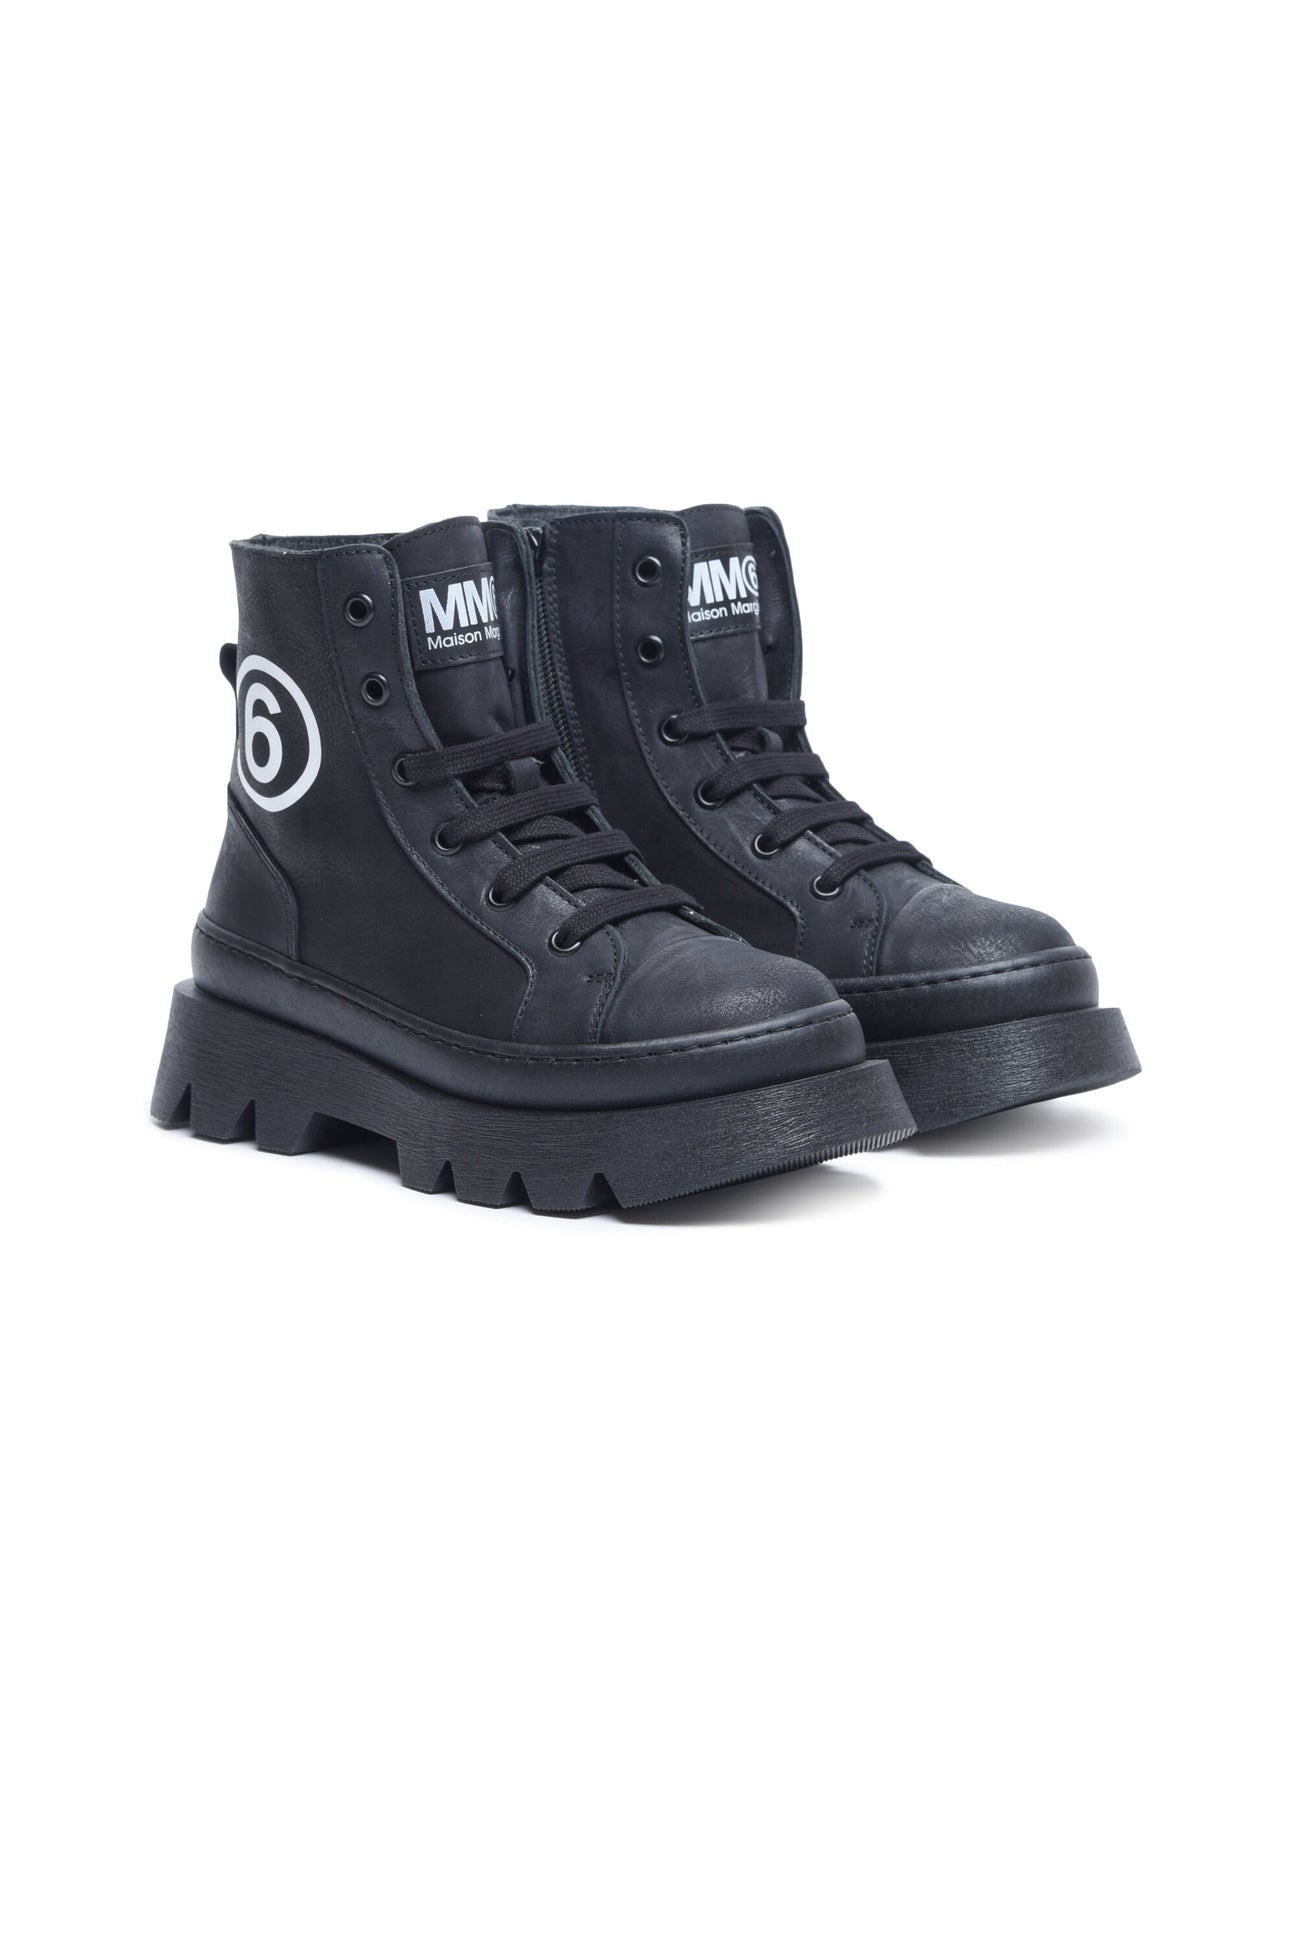 Statement lace-up boots with logo Statement lace-up boots with logo